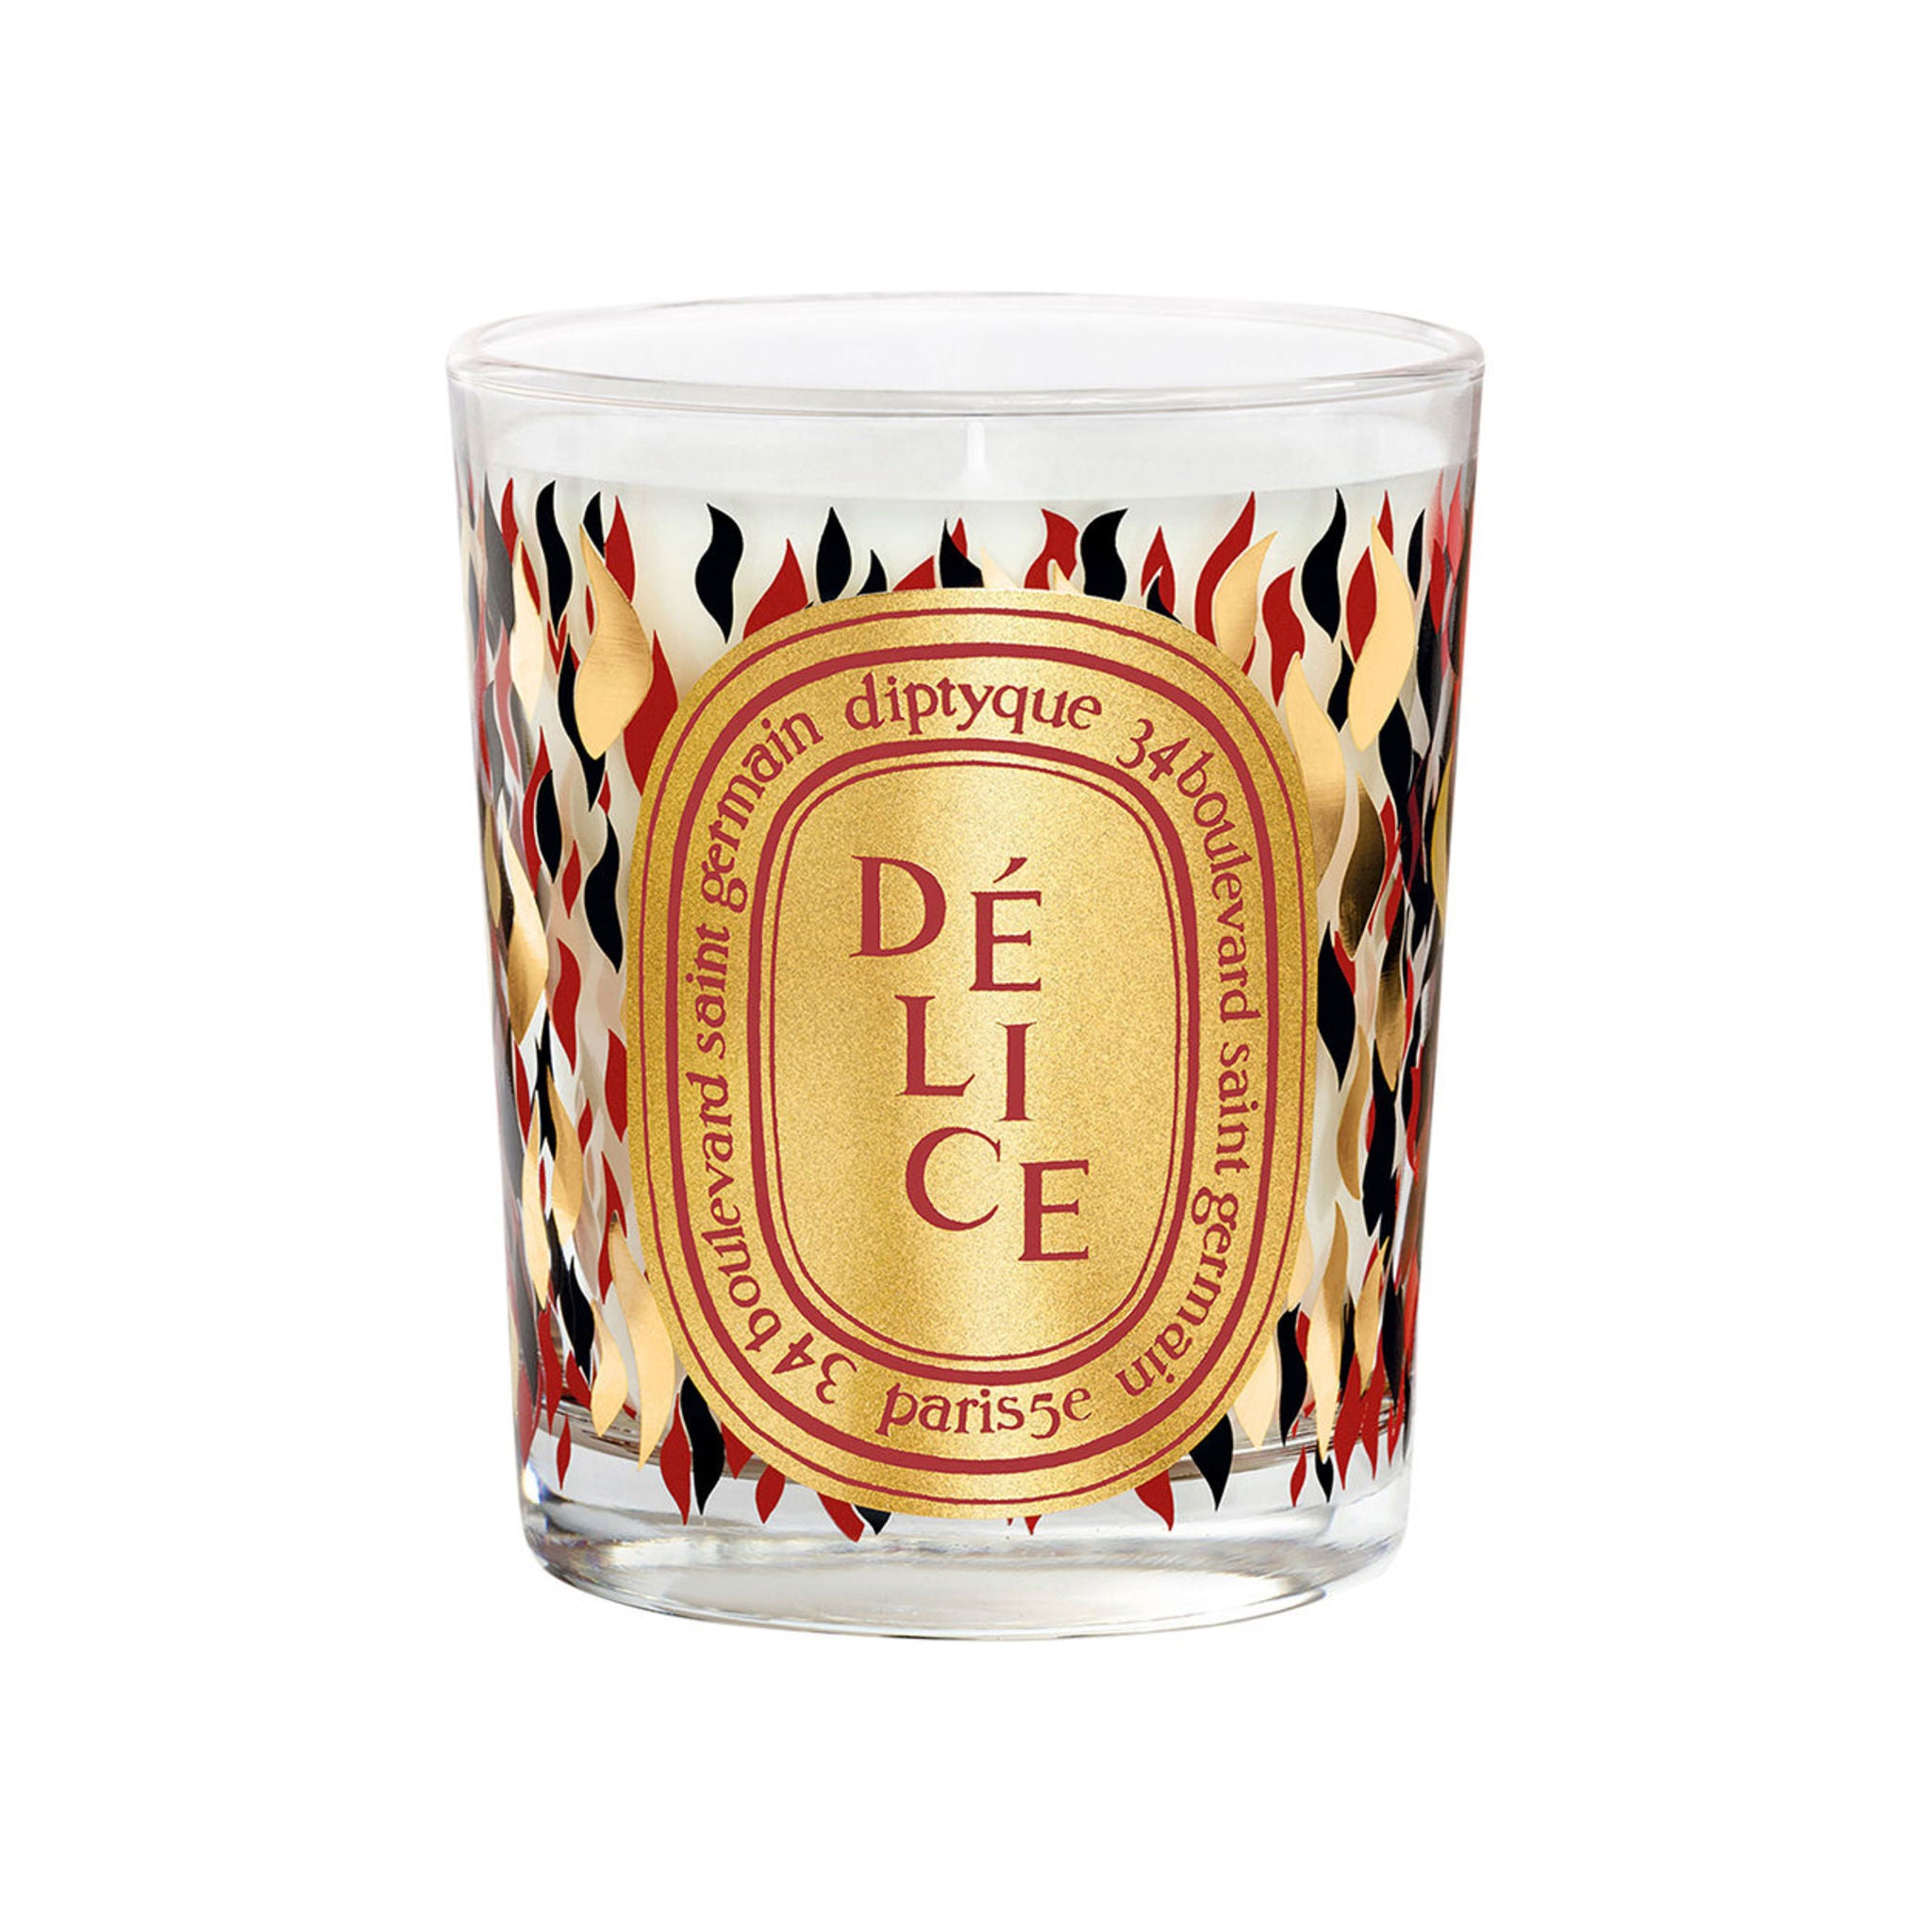 Diptyque Delice Scented Candle (Limited Edition) – bluemercury